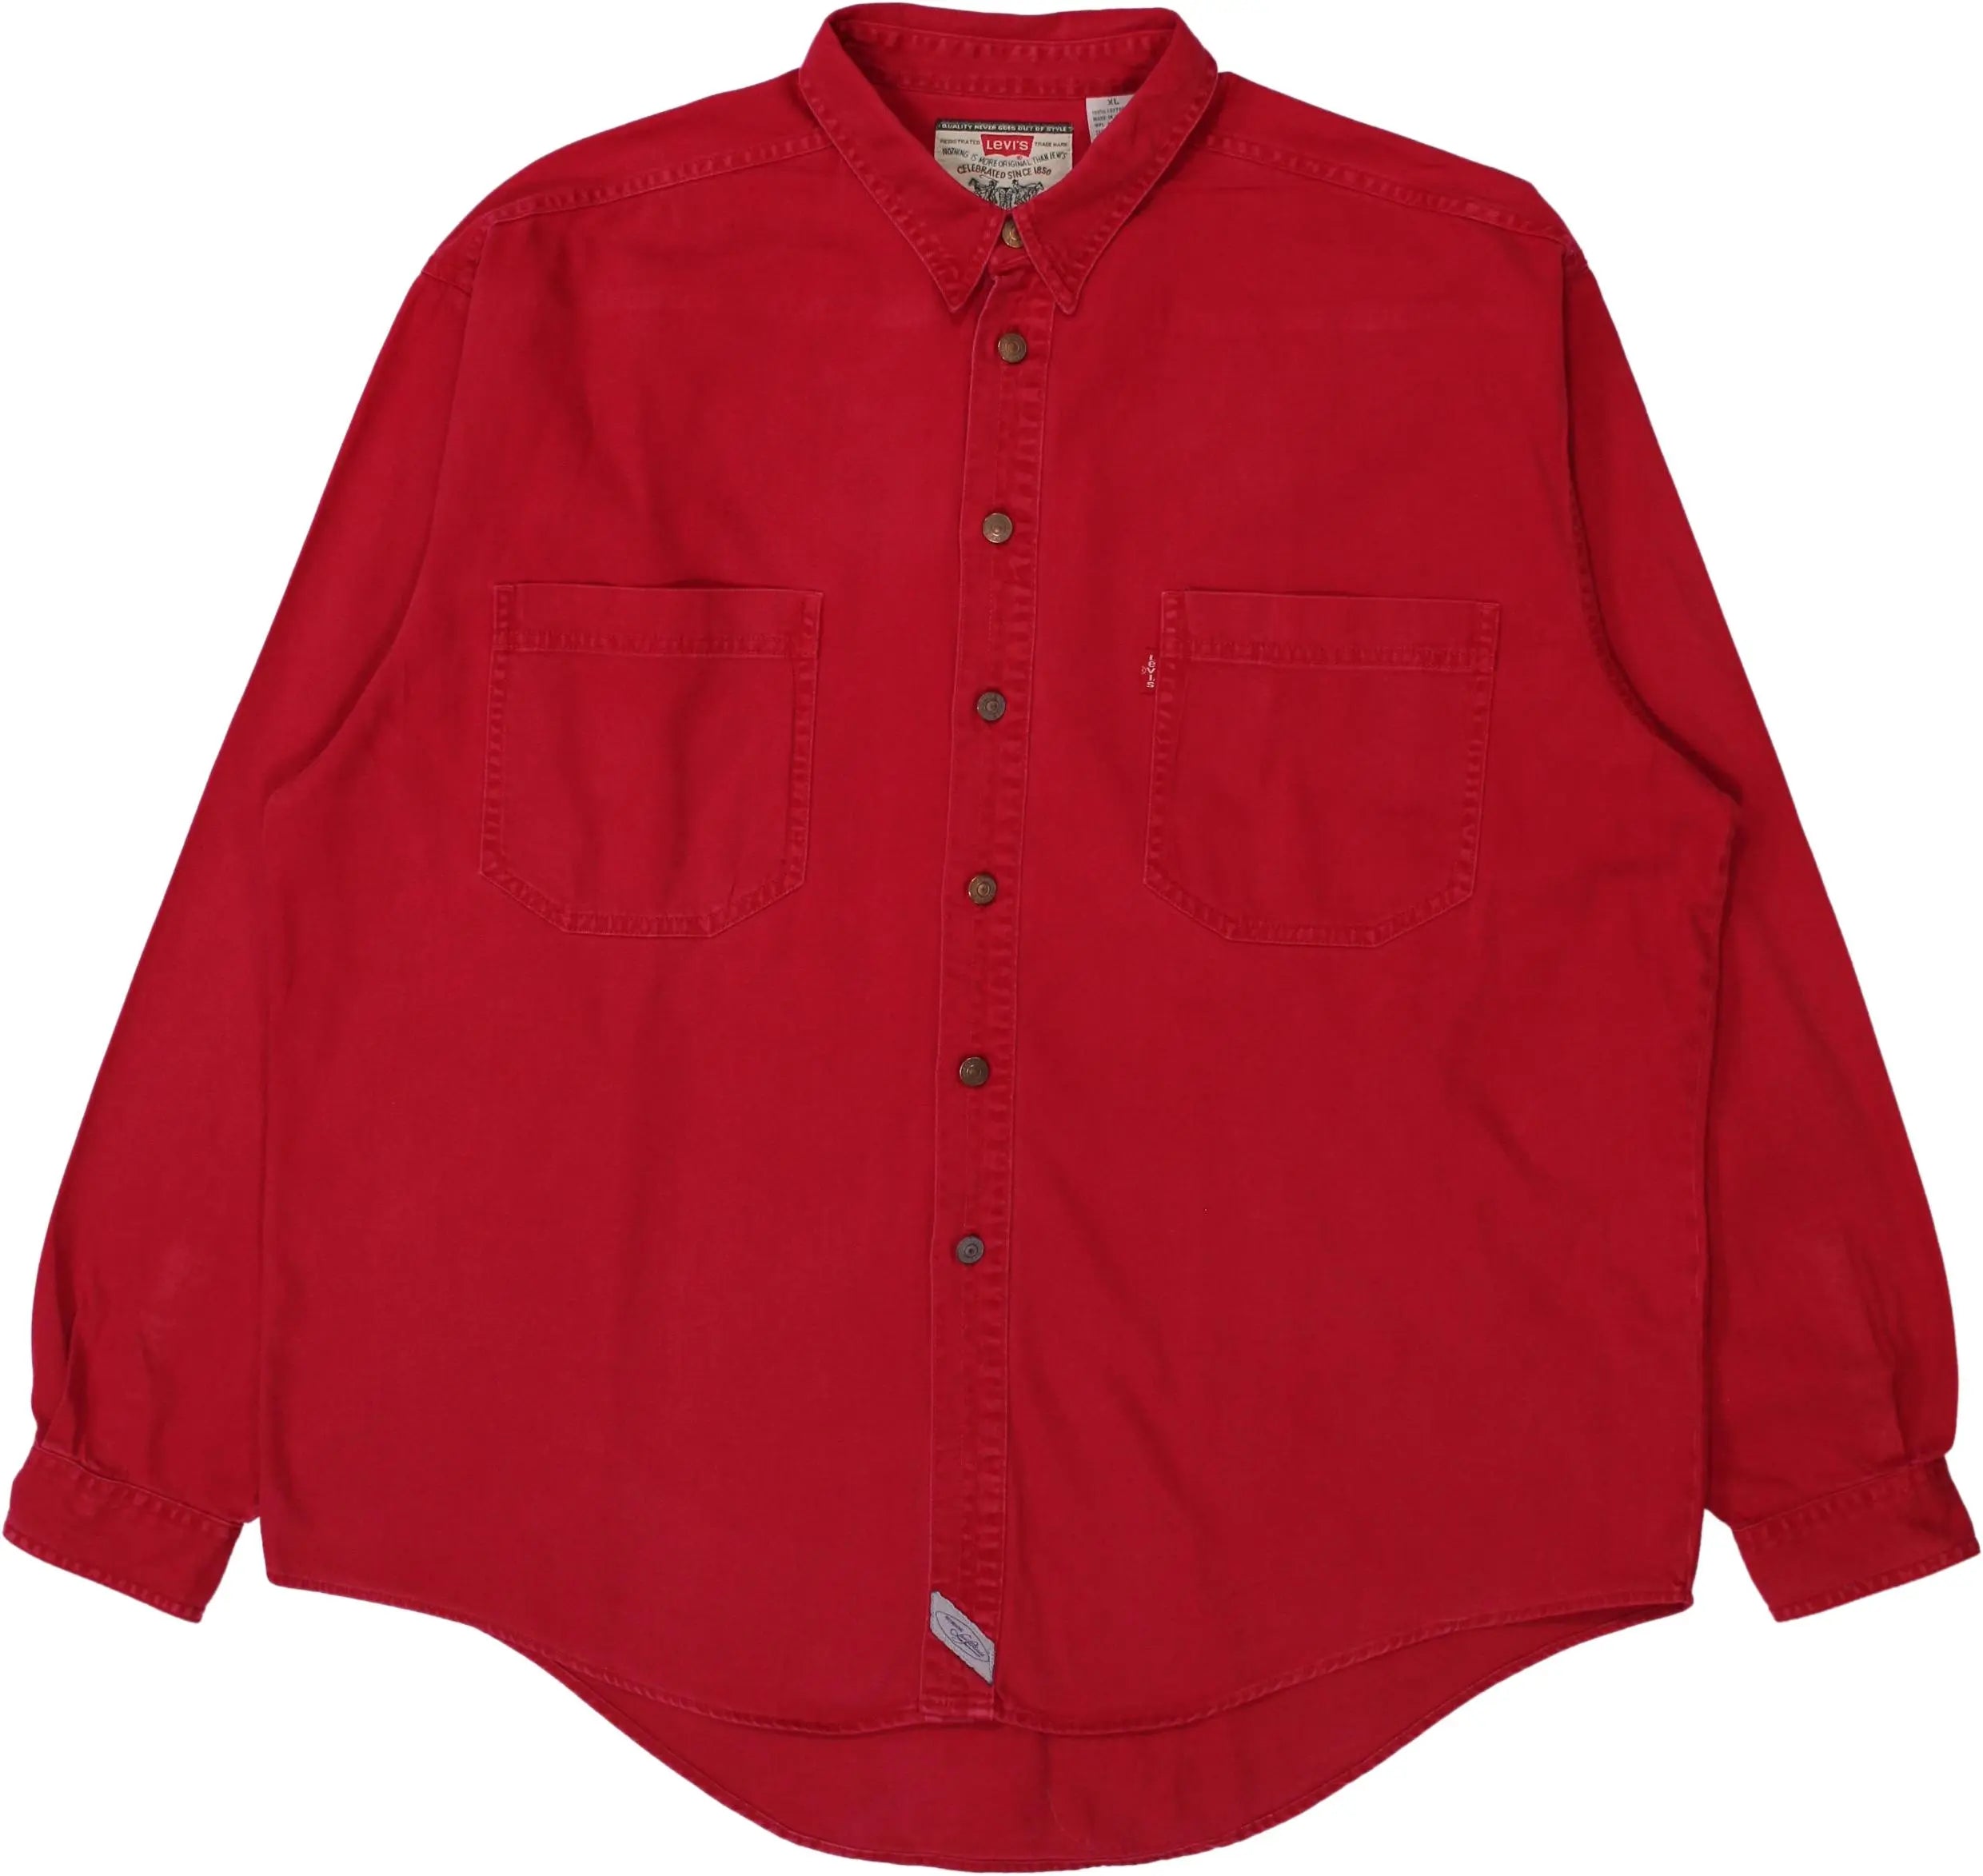 Levi's - Red Shirt by Levi's- ThriftTale.com - Vintage and second handclothing